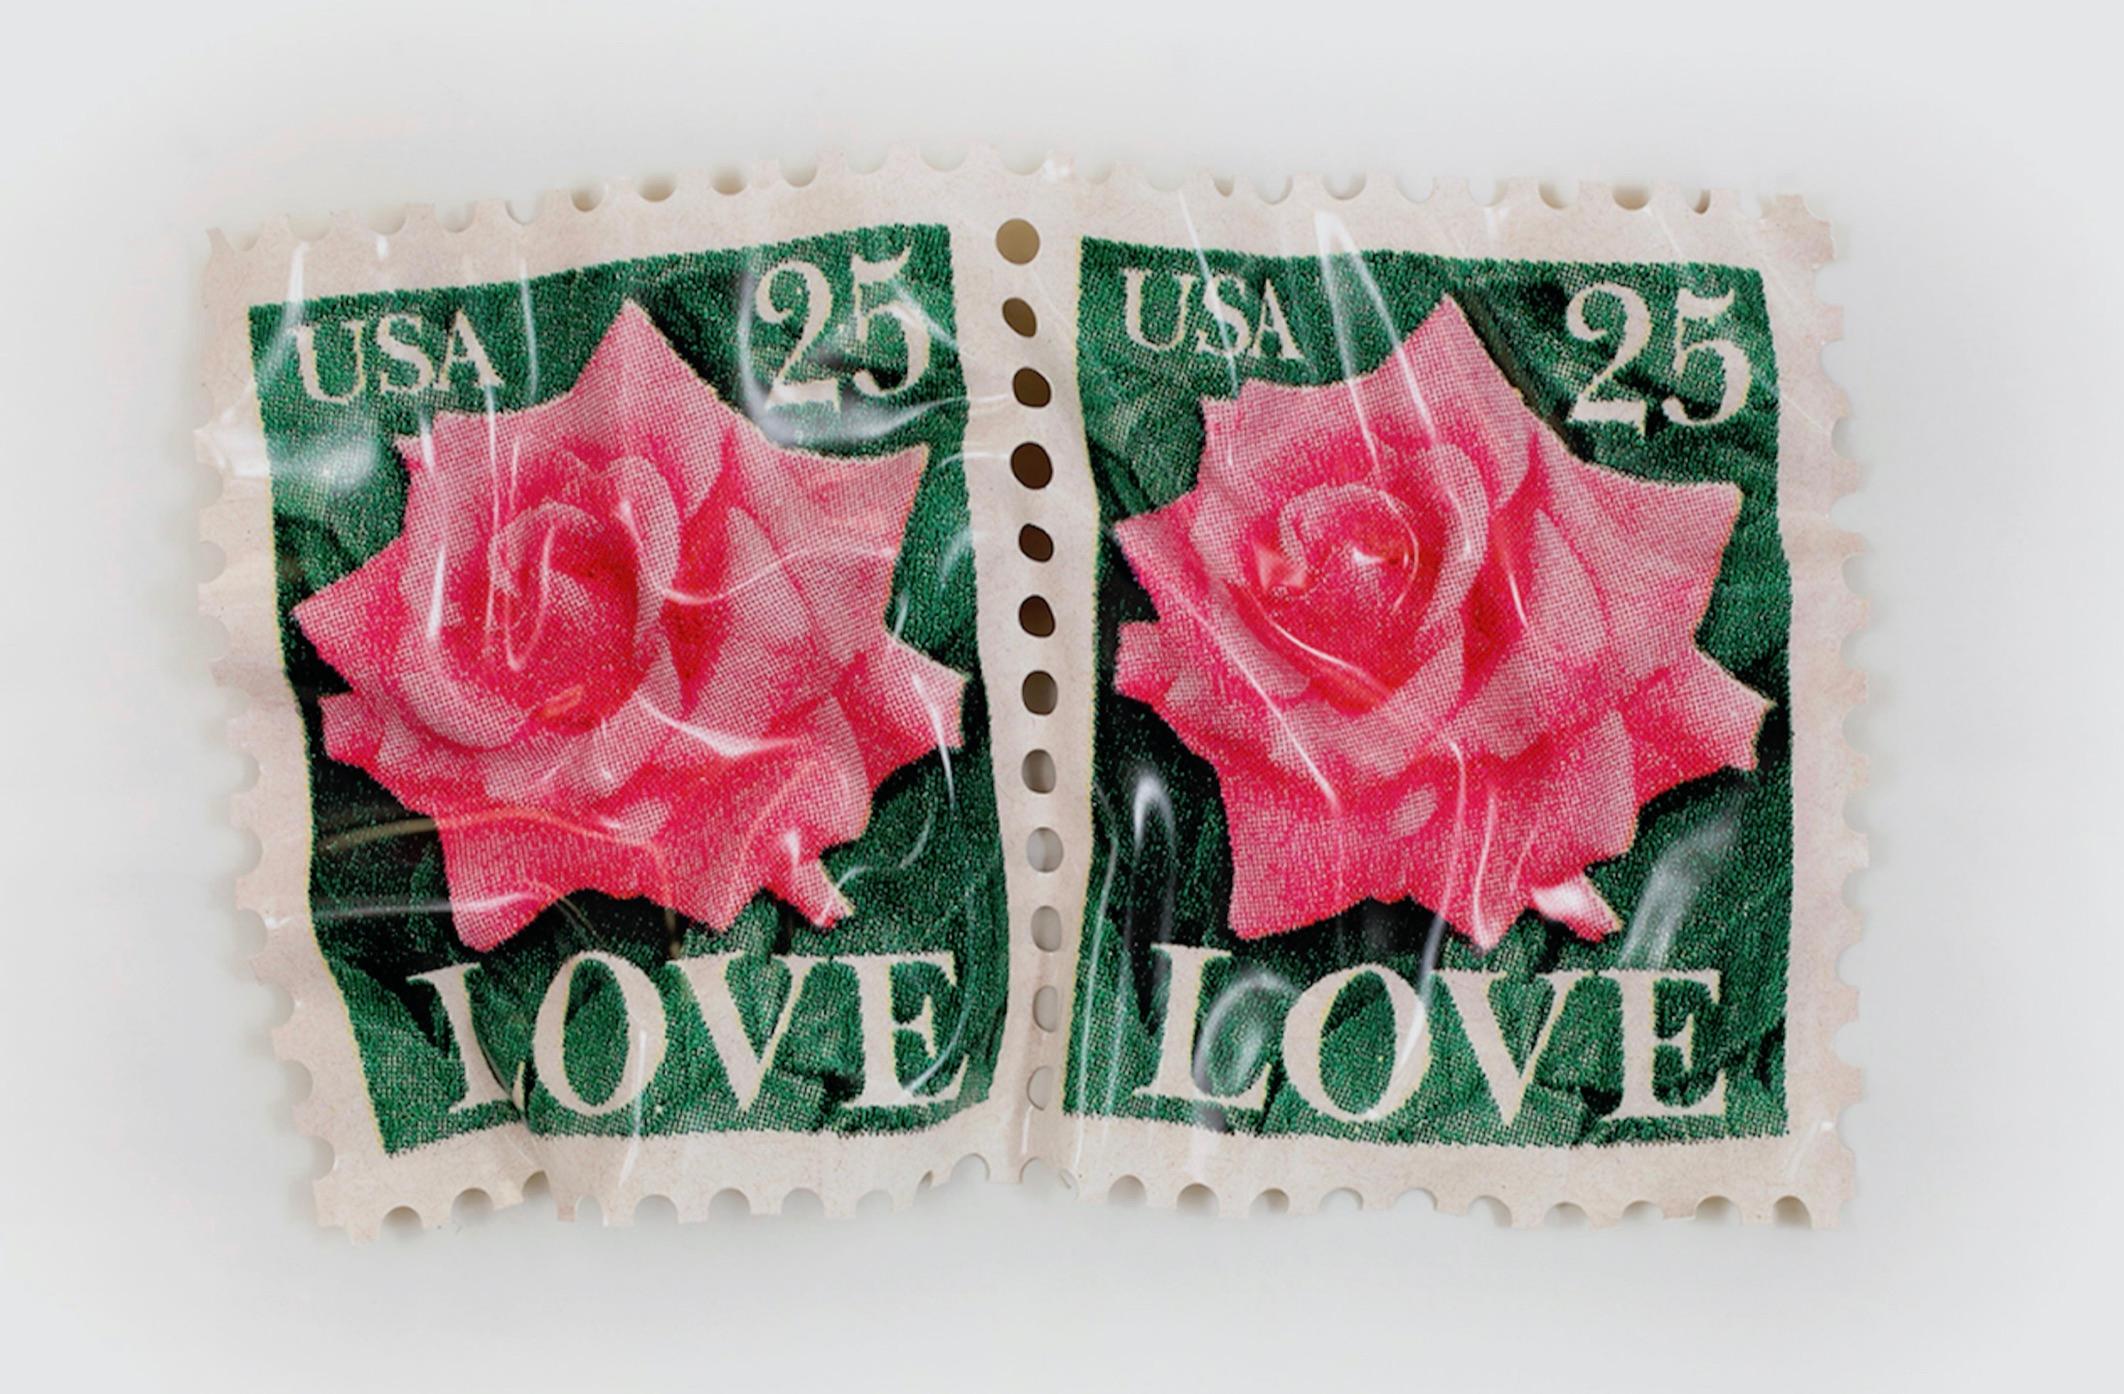 Two Rose Love Stamps #5 - Mixed Media Art by Paul Rousso